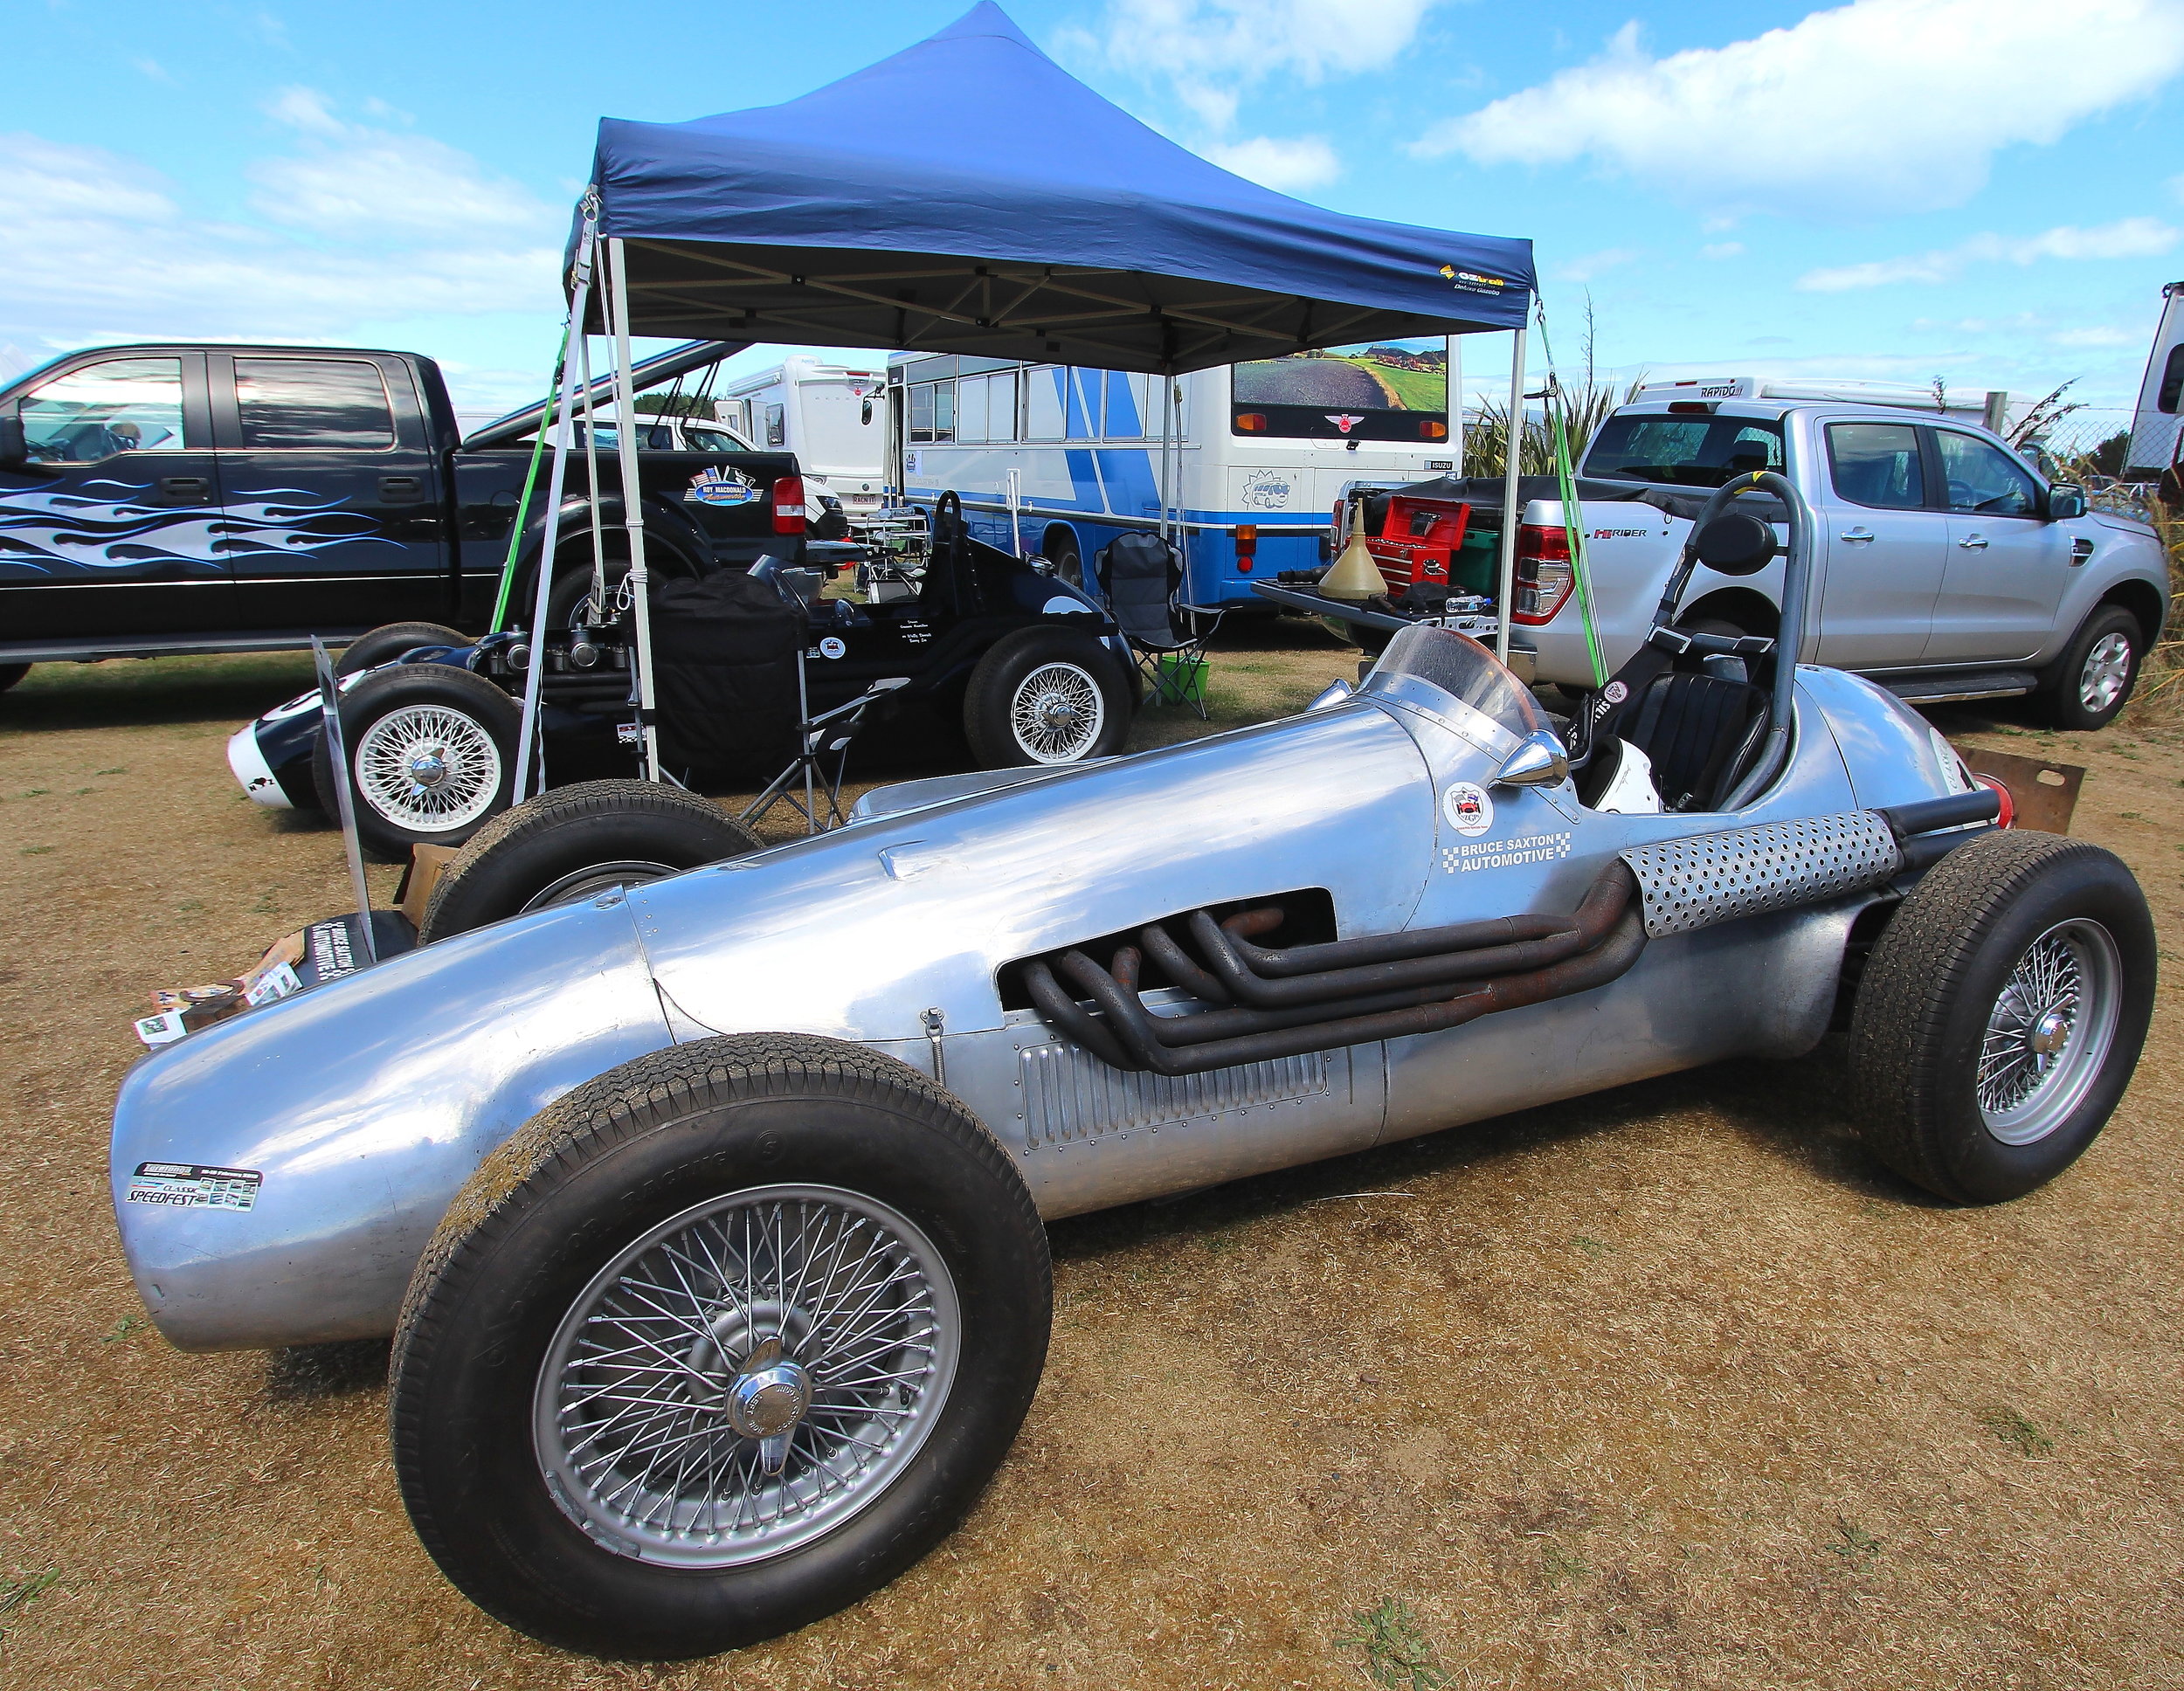 Cooling off: Paul Coghill’s (Dunedin) lovely Jaguar Special with Graeme Hamilton’s (Lyttelton) ACEIII in the background